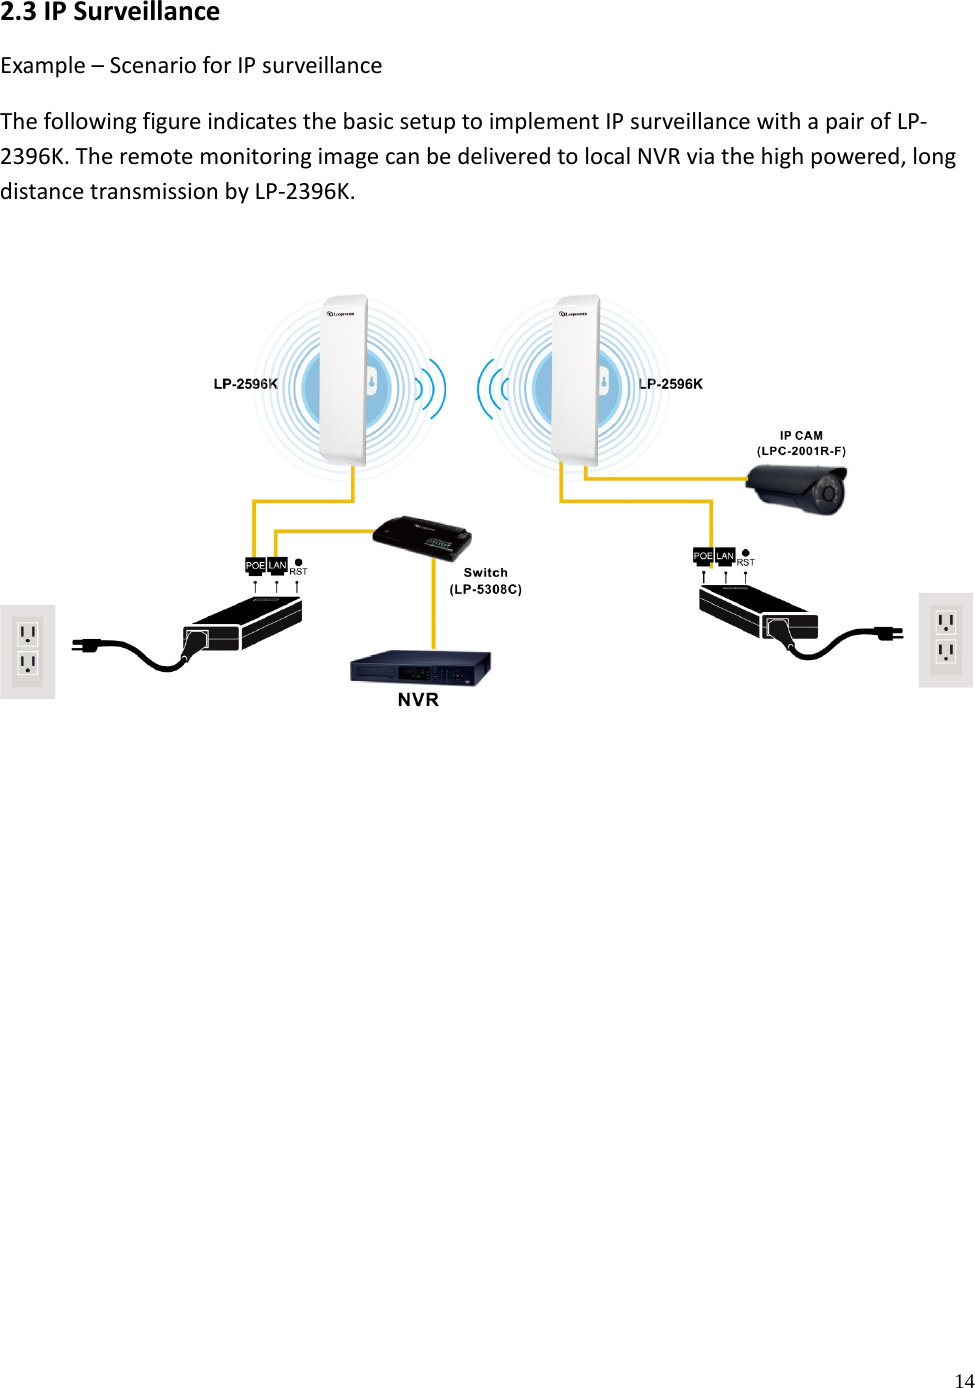 14 2.3 IP Surveillance Example – Scenario for IP surveillance The following figure indicates the basic setup to implement IP surveillance with a pair of LP-2396K. The remote monitoring image can be delivered to local NVR via the high powered, long distance transmission by LP-2396K. 